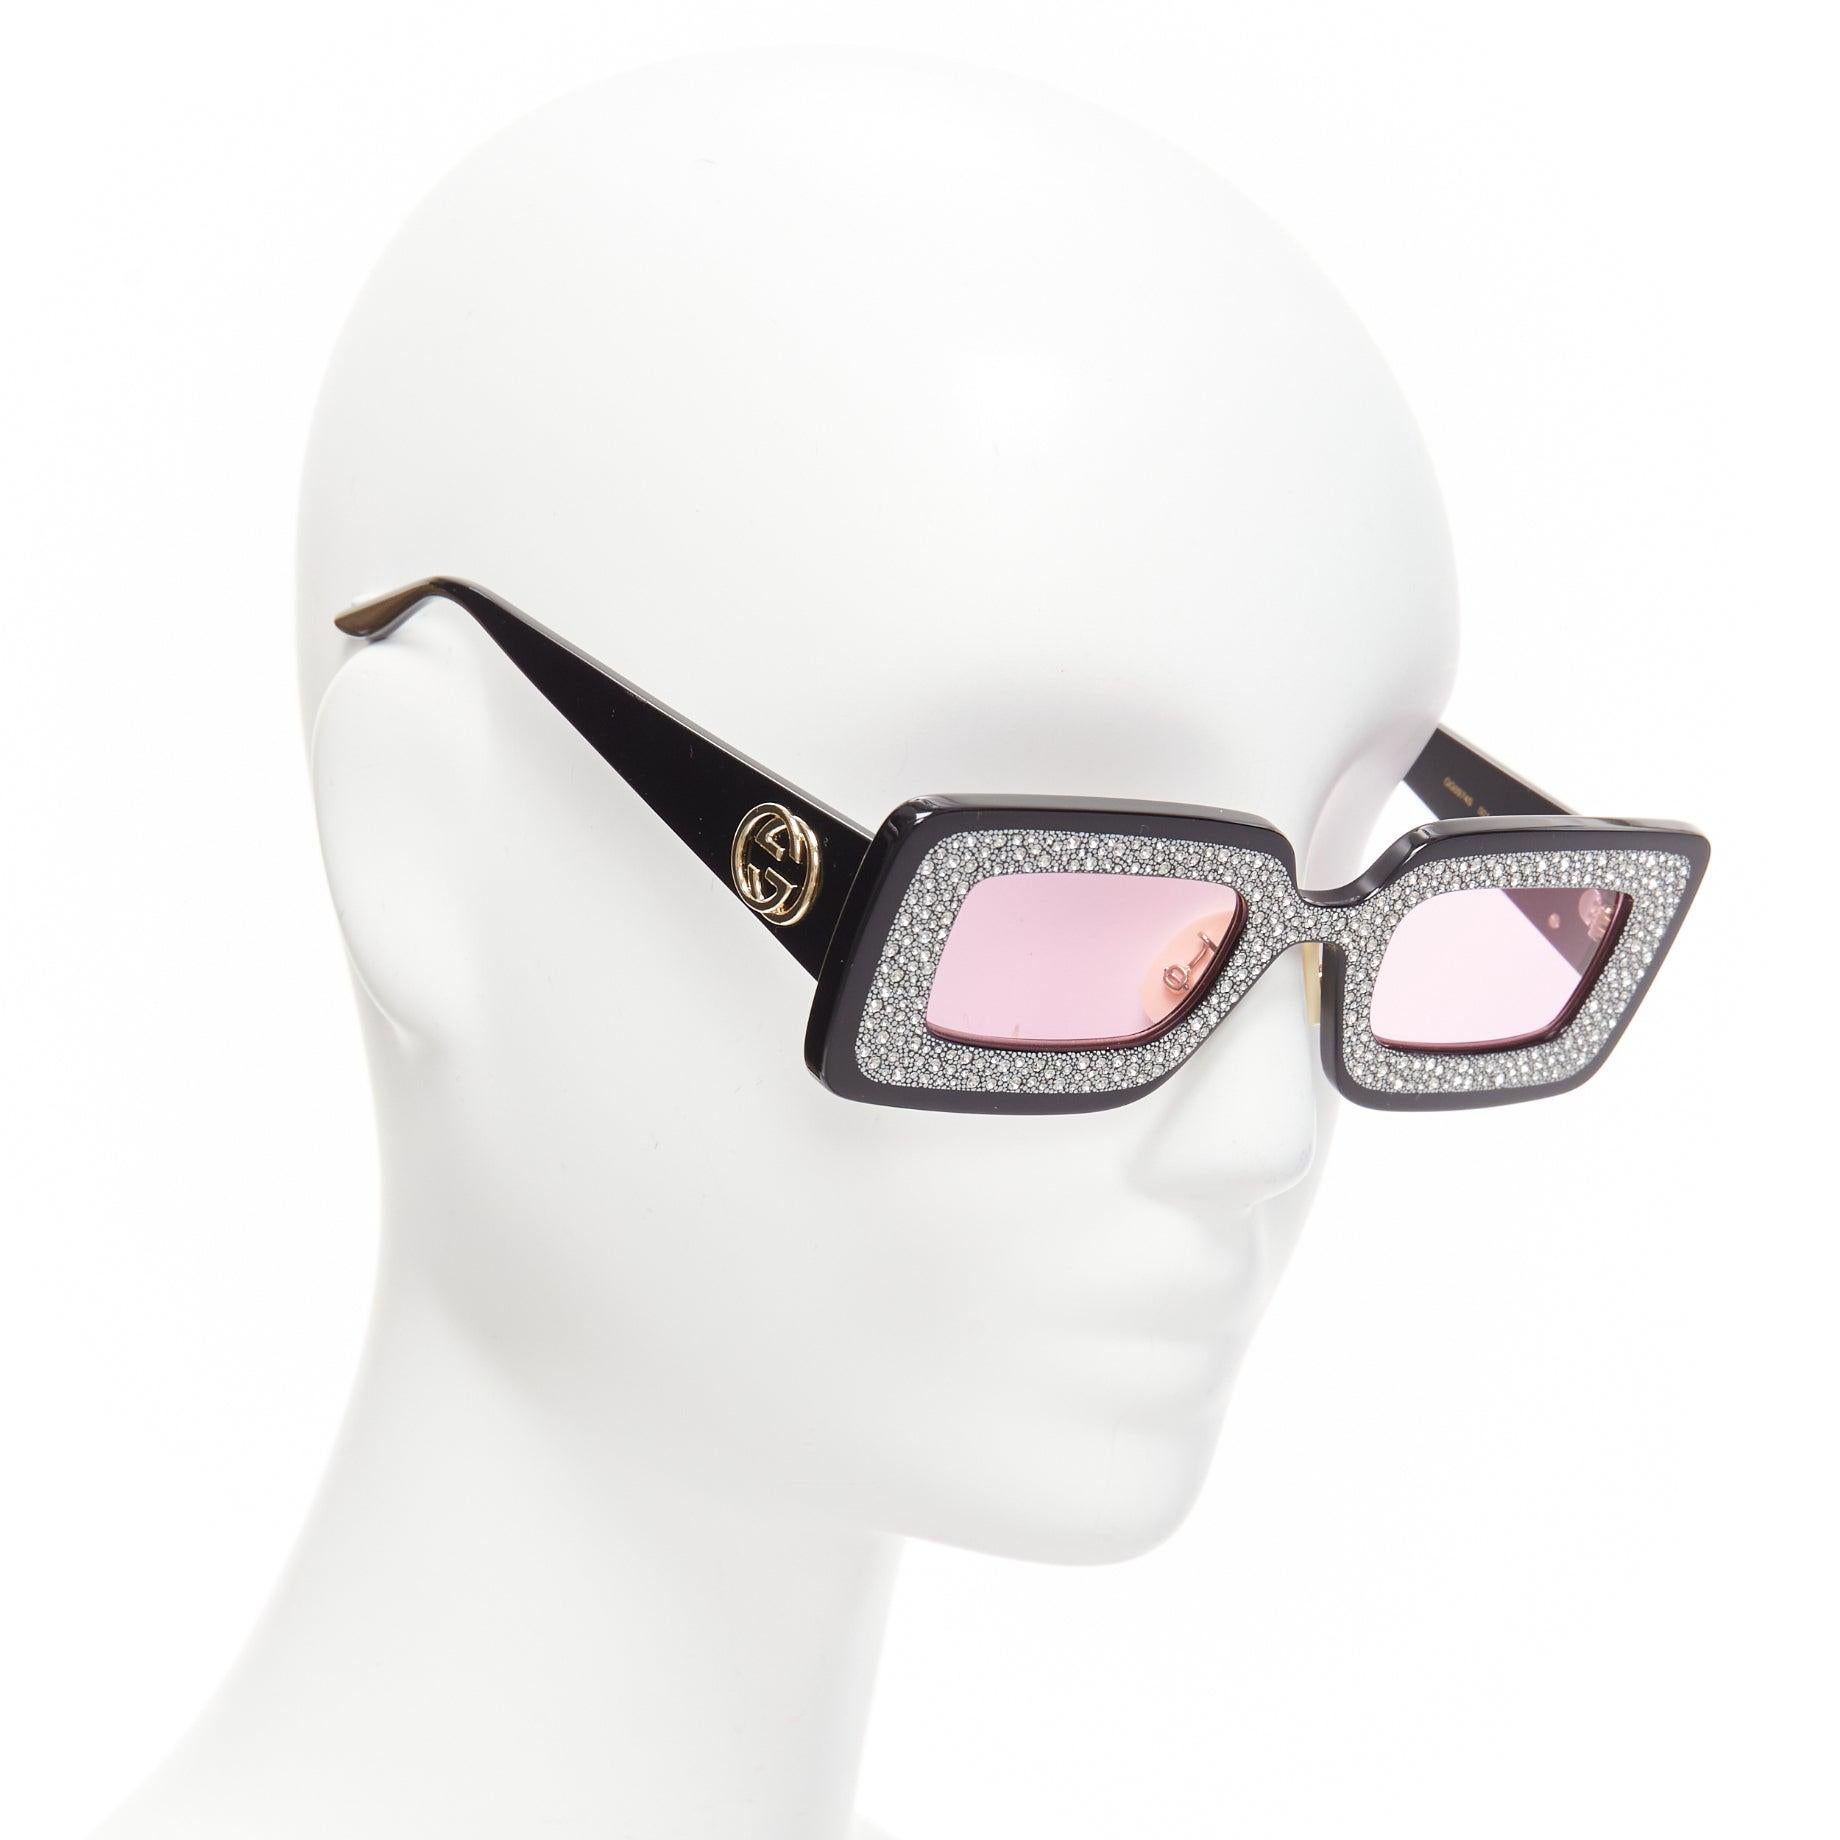 GUCCI GG0974S silver crystal frame pink lens rectangular sunnies
Reference: TGAS/D01052
Brand: Gucci
Designer: Alessandro Michele
Model: GG0974S
Material: Acetate
Color: Black, Silver
Pattern: Solid
Lining: Black Acetate
Extra Details: GG logo at